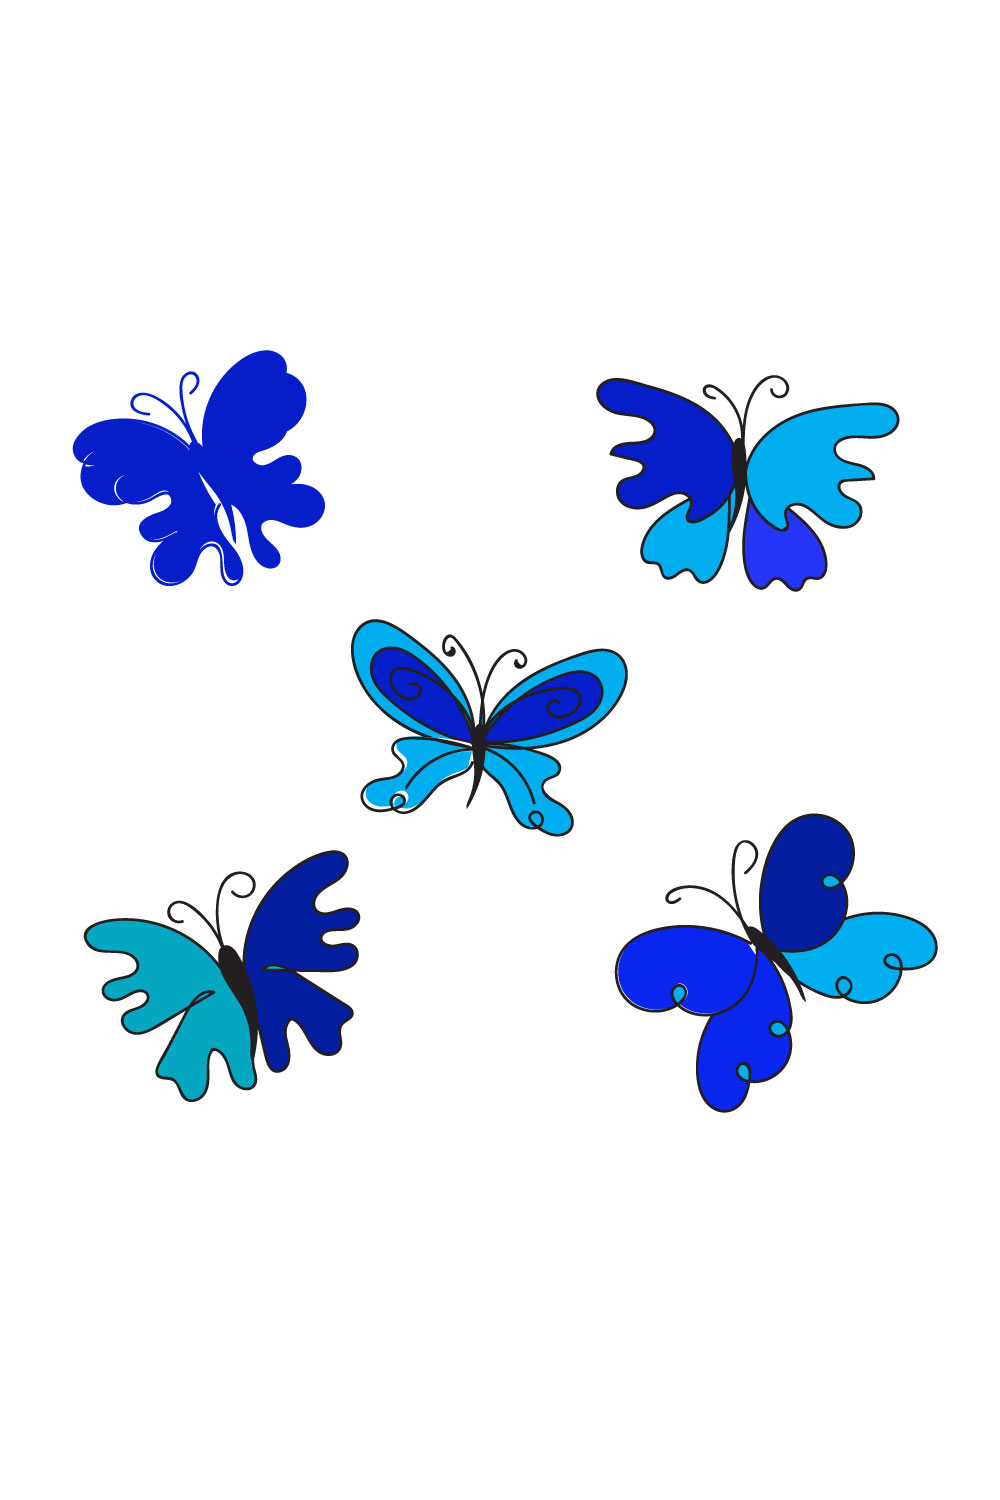 Butterfly liner art svg pinterest preview image.